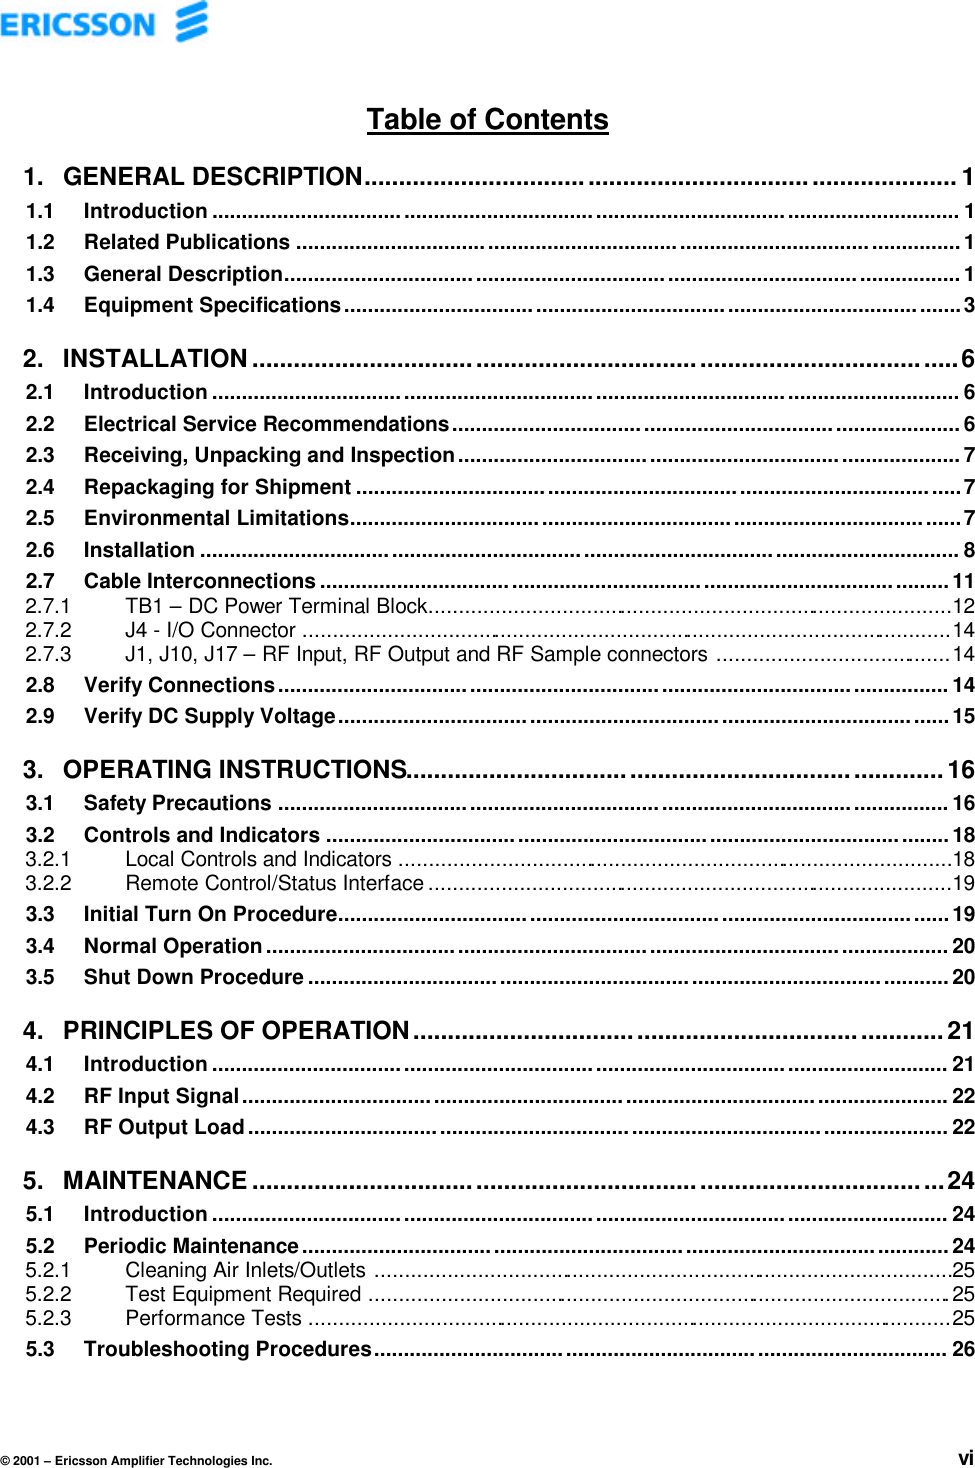 © 2001 – Ericsson Amplifier Technologies Inc. viTable of Contents1. GENERAL DESCRIPTION..................................................................................... 11.1 Introduction ............................................................................................................................. 11.2 Related Publications ............................................................................................................... 11.3 General Description................................ ................................................................ ................. 11.4 Equipment Specifications.......................................................................................................32. INSTALLATION.....................................................................................................62.1 Introduction ............................................................................................................................. 62.2 Electrical Service Recommendations..................................................................................... 62.3 Receiving, Unpacking and Inspection.................................................................................... 72.4 Repackaging for Shipment .....................................................................................................72.5 Environmental Limitations......................................................................................................72.6 Installation ............................................................................................................................... 82.7 Cable Interconnections .........................................................................................................112.7.1 TB1 – DC Power Terminal Block.......................................................................................122.7.2 J4 - I/O Connector ............................................................................................................142.7.3 J1, J10, J17 – RF Input, RF Output and RF Sample connectors .......................................142.8 Verify Connections................................................................................................................ 142.9 Verify DC Supply Voltage...................................................................................................... 153. OPERATING INSTRUCTIONS.............................................................................163.1 Safety Precautions ................................................................................................................ 163.2 Controls and Indicators ........................................................................................................ 183.2.1 Local Controls and Indicators ............................................................................................183.2.2 Remote Control/Status Interface .......................................................................................193.3 Initial Turn On Procedure......................................................................................................193.4 Normal Operation.................................................................................................................. 203.5 Shut Down Procedure ................................................................ ........................................... 204. PRINCIPLES OF OPERATION............................................................................214.1 Introduction ........................................................................................................................... 214.2 RF Input Signal...................................................................................................................... 224.3 RF Output Load..................................................................................................................... 225. MAINTENANCE ...................................................................................................245.1 Introduction ........................................................................................................................... 245.2 Periodic Maintenance................................................................ ............................................ 245.2.1 Cleaning Air Inlets/Outlets ................................................................................................255.2.2 Test Equipment Required .................................................................................................255.2.3 Performance Tests ...........................................................................................................255.3 Troubleshooting Procedures................................................................................................ 26